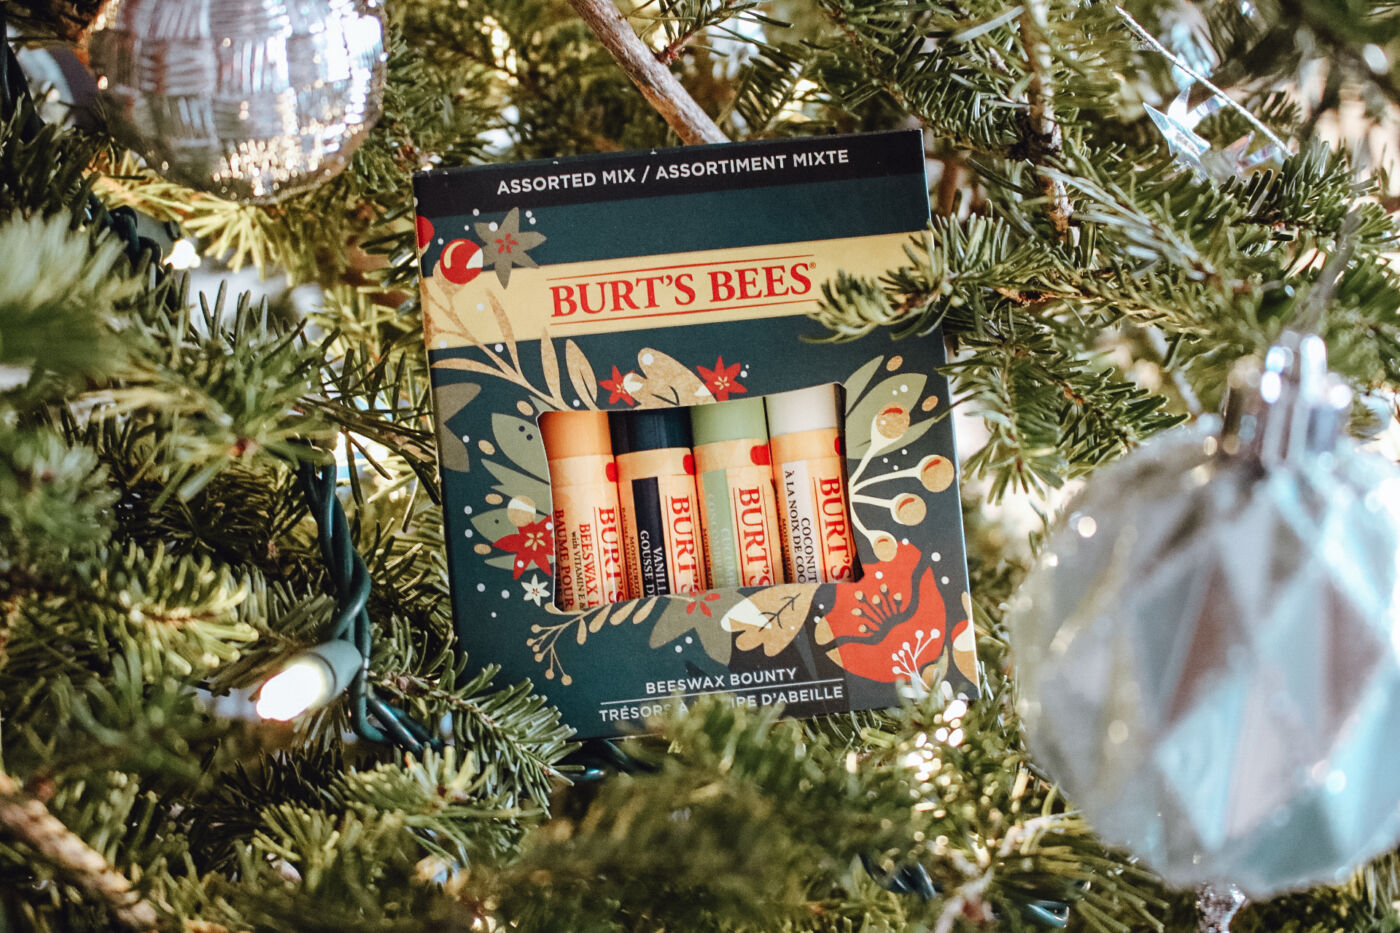 Burt's Bees Beeswax Bounty Holiday 2020 Shoppers Drug Mart